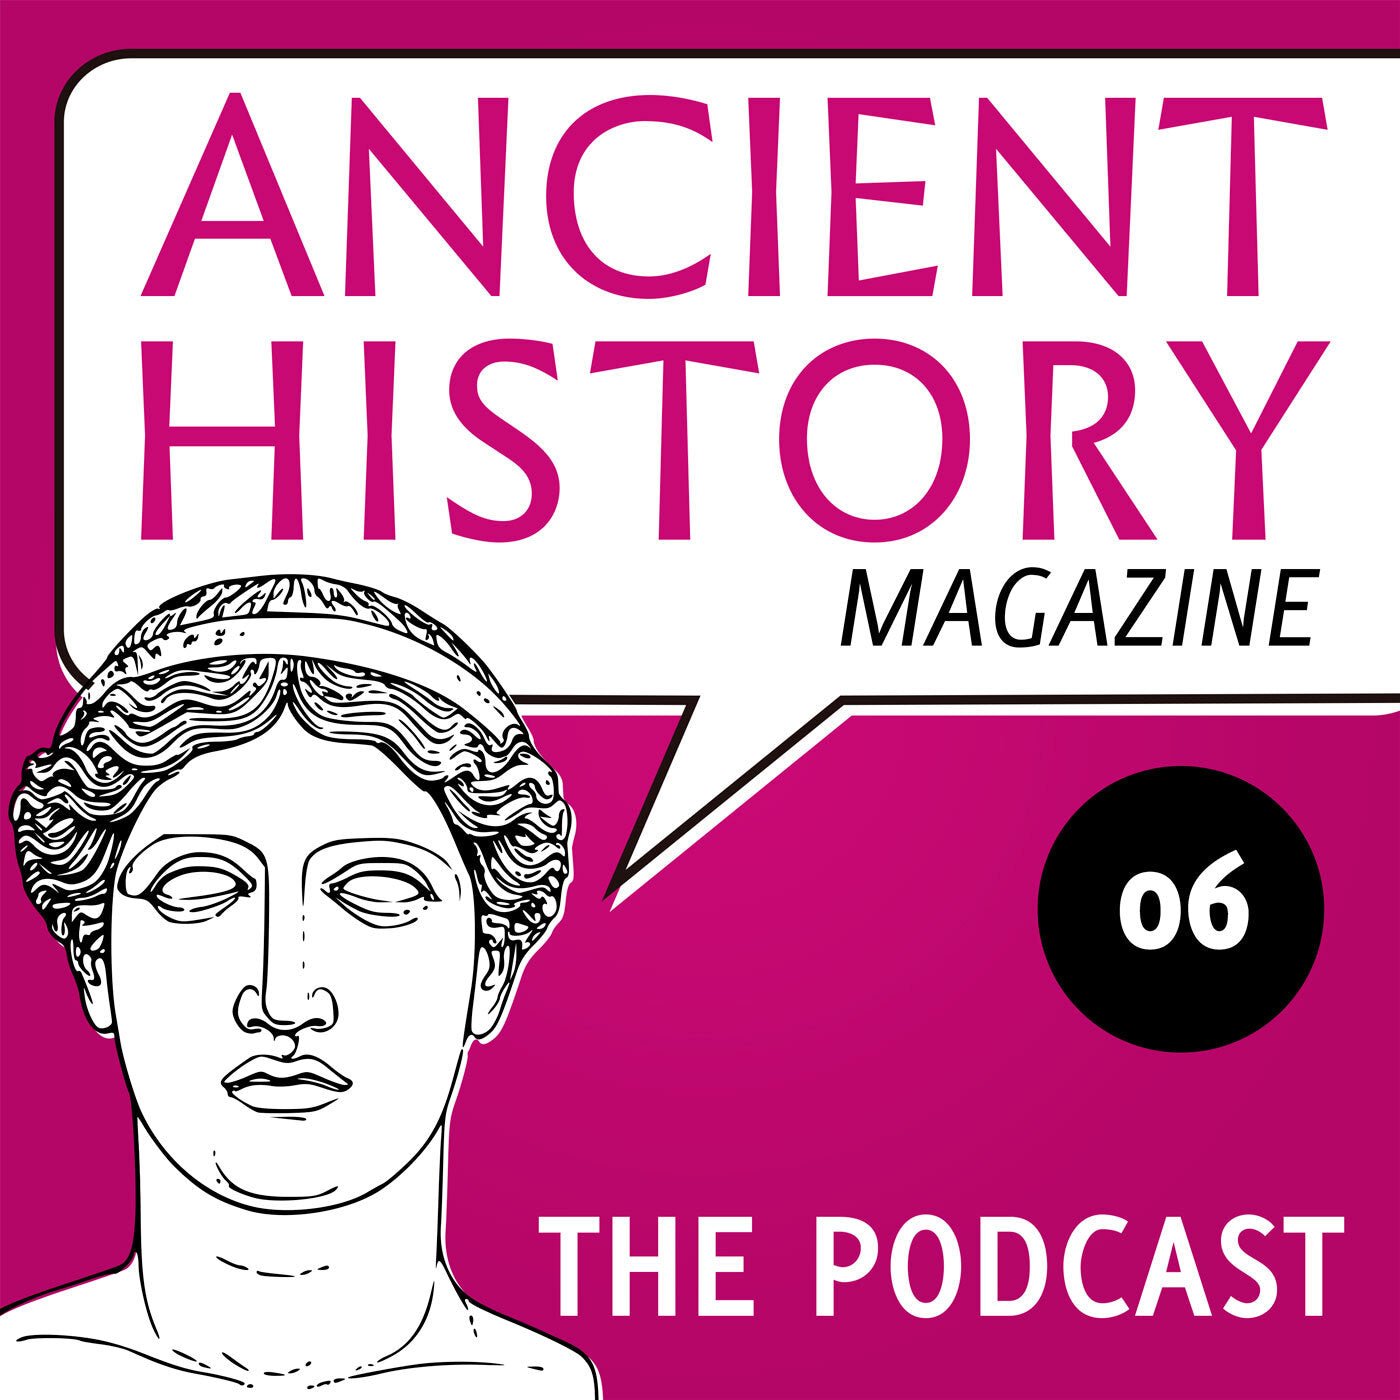 Ancient History Podcast - After 1177 B.C. with Eric Cline